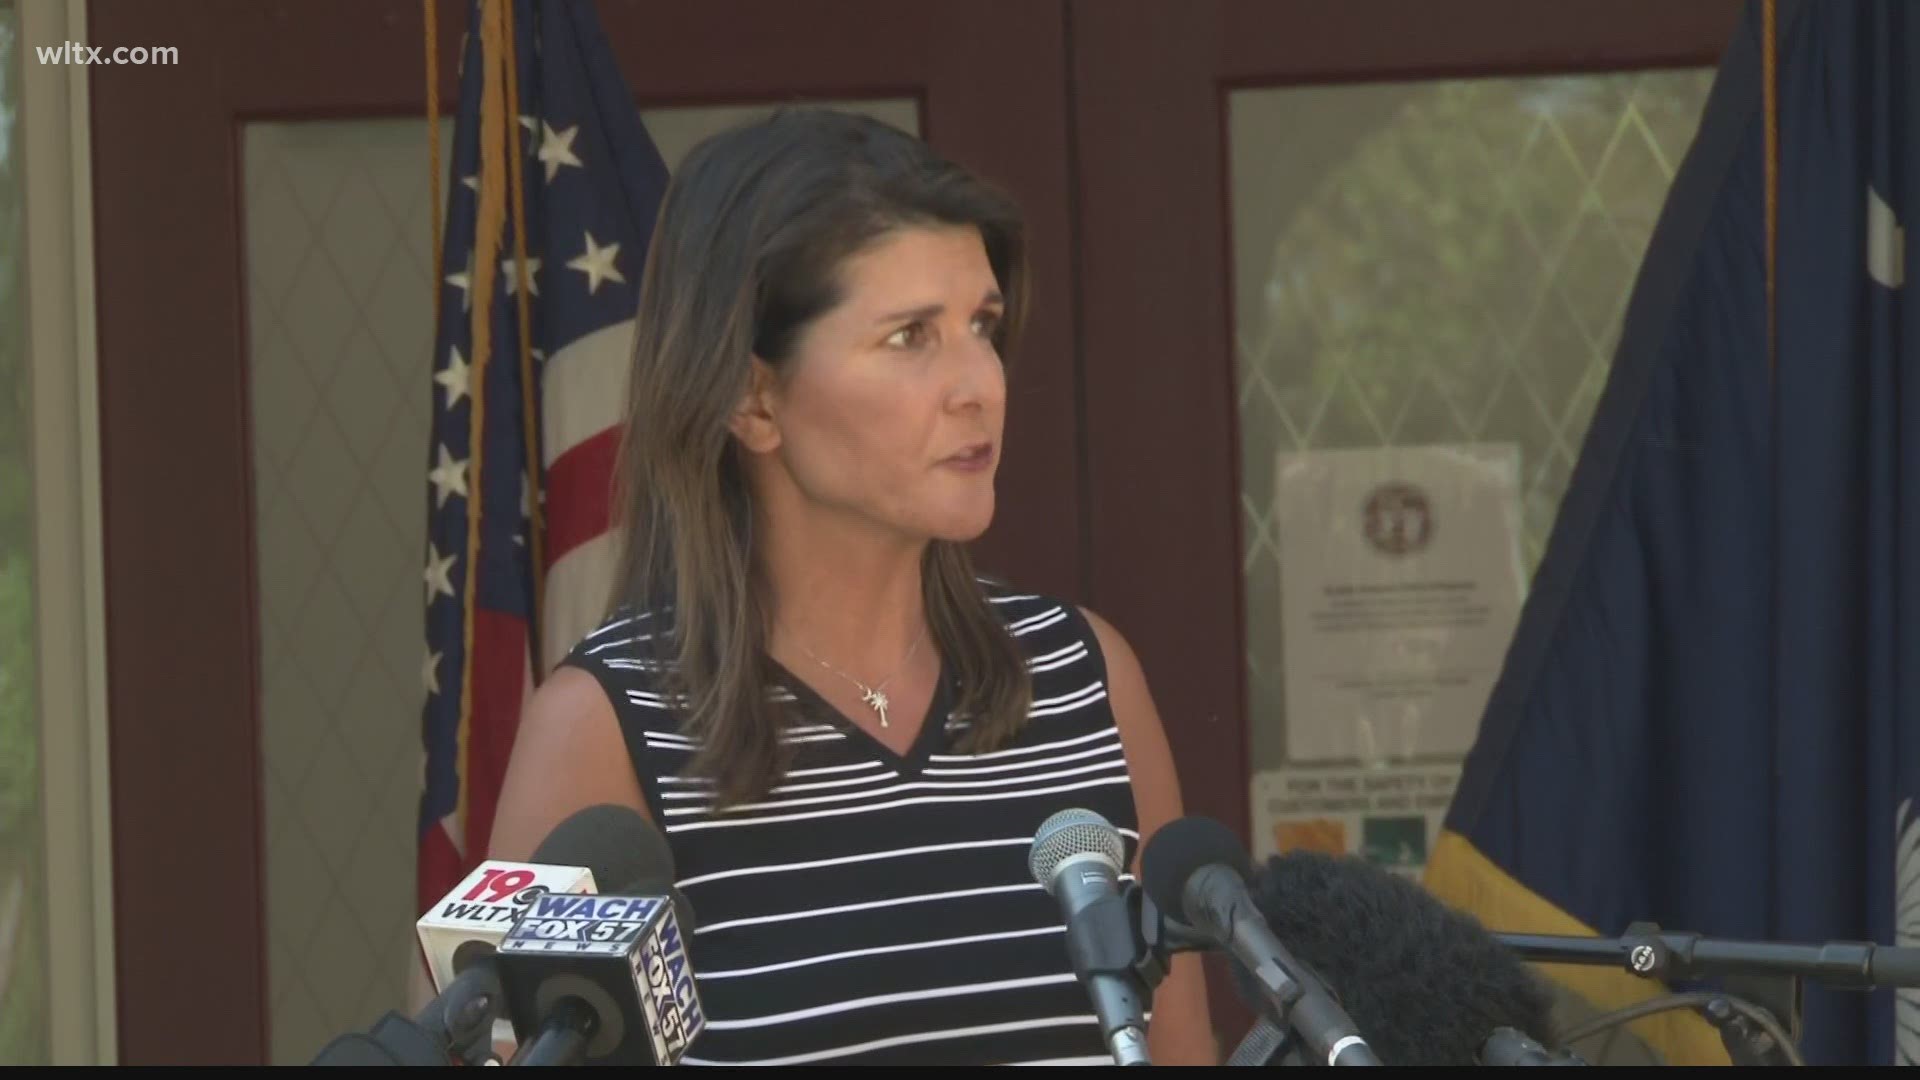 Former U.N. Ambassador and SC Gov. Nikki Haley said Monday that she would not seek her party's nomination if former President Donald Trump opts to run again.